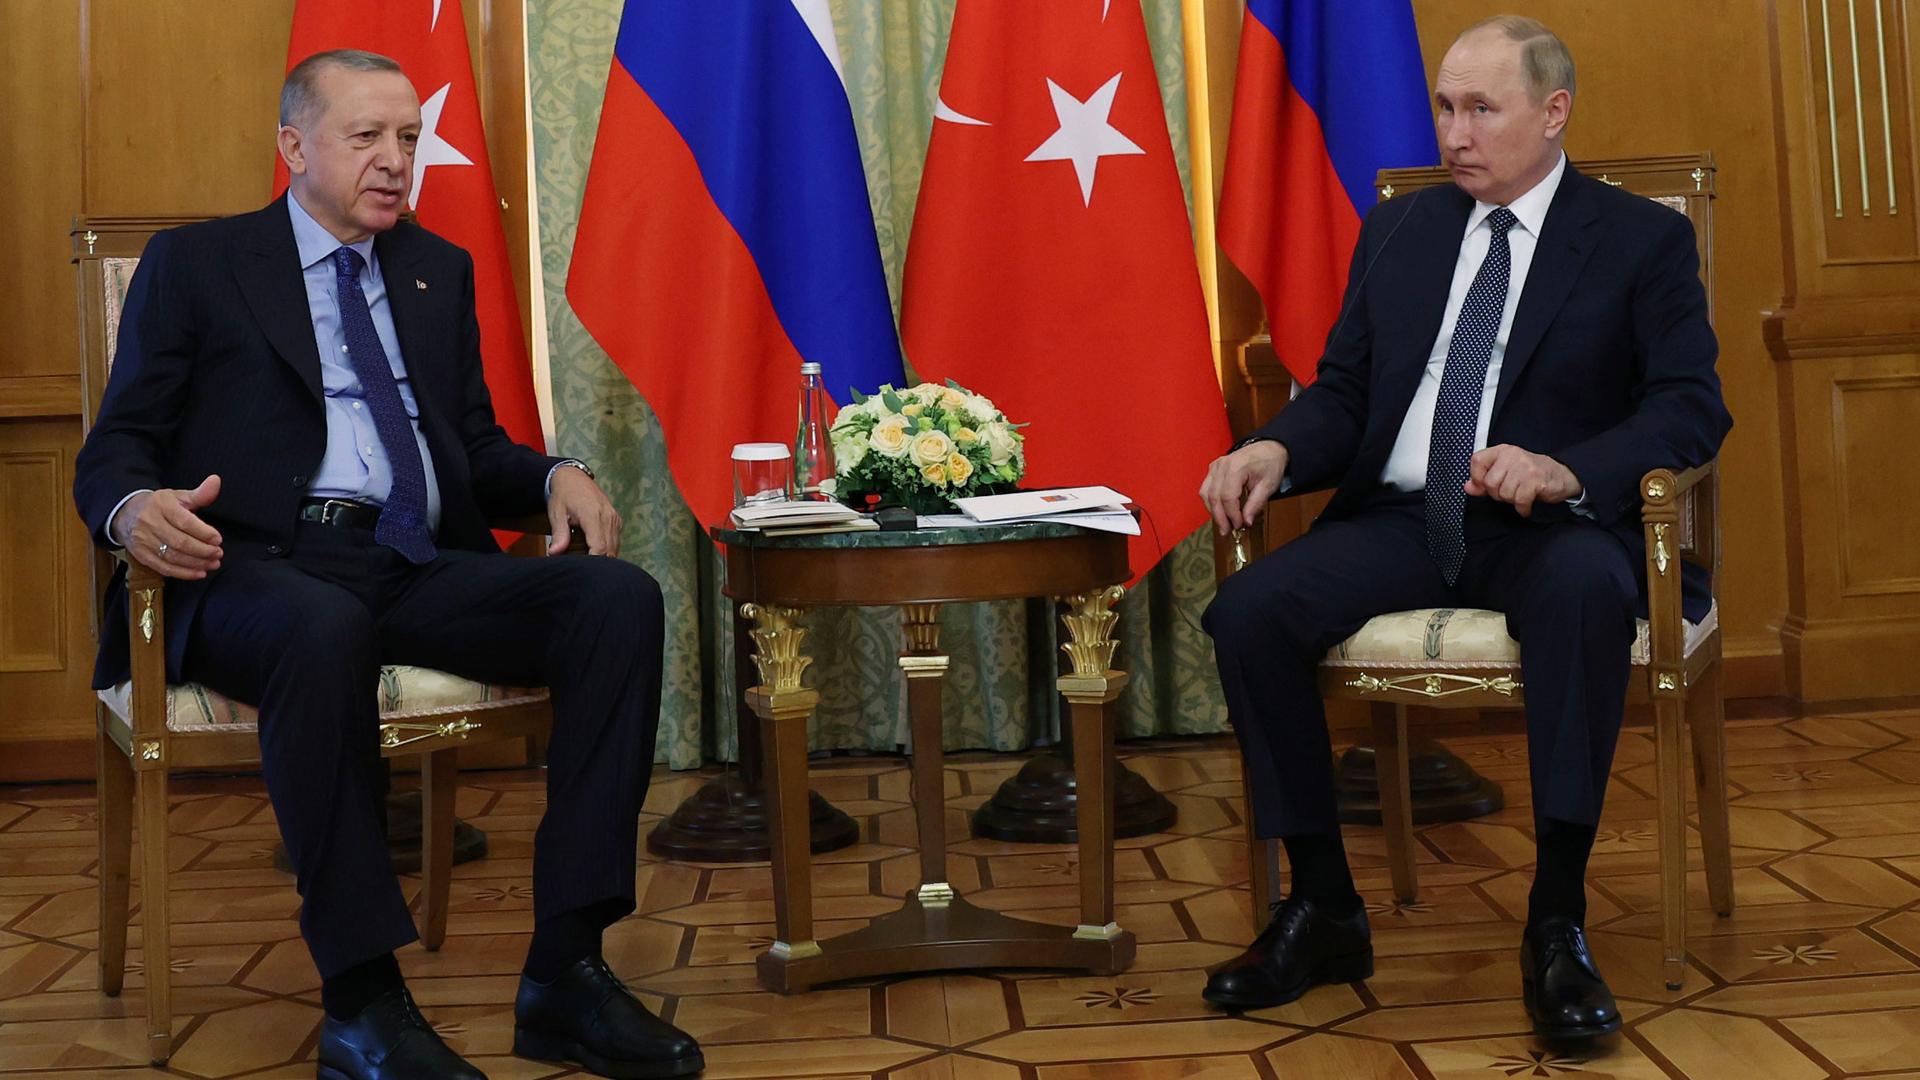 In this handout photo provided by the Turkish Presidency, Turkish President Recep Tayyip Erdogan, left, and Russian President Vladimir Putin speak their meeting at the Rus sanatorium in the Black Sea resort of Sochi, Russia, Friday, Aug. 5, 2022. 